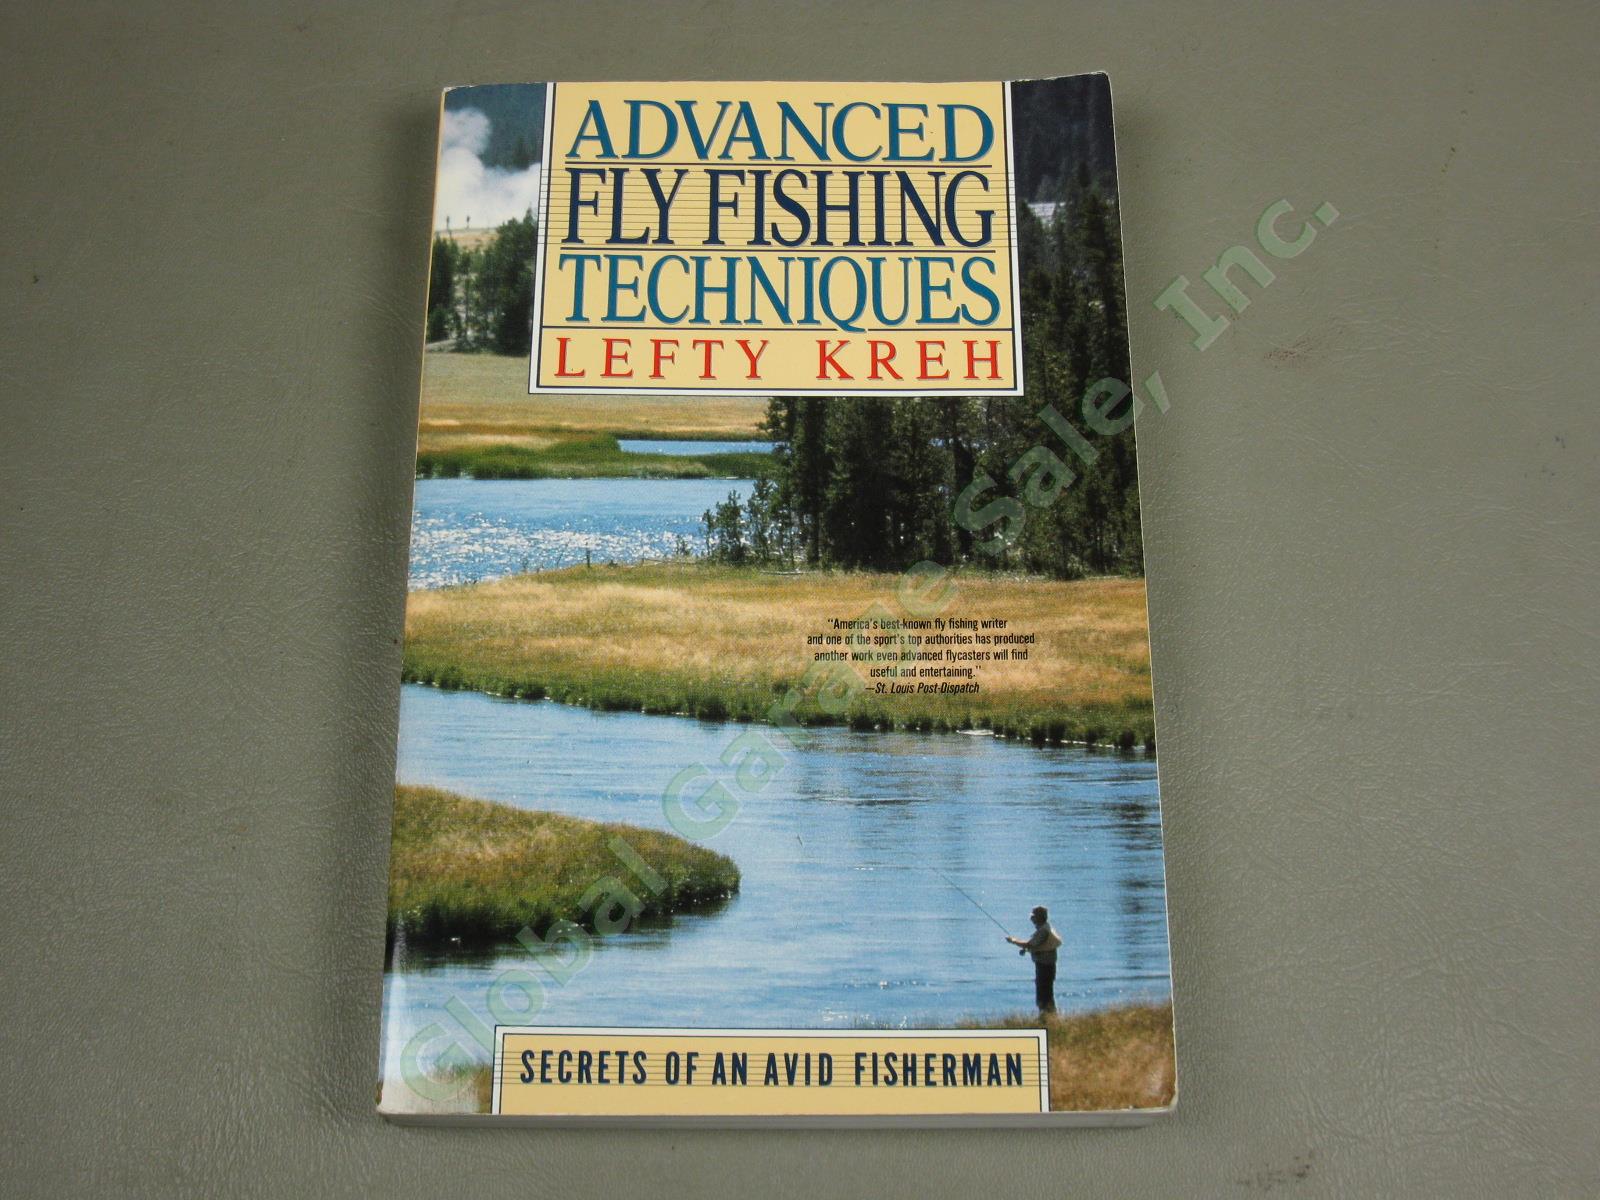 10 Fly Fishing Casting Handbook Guide Manual Books Lot Beyond Trout Halford + NR 2